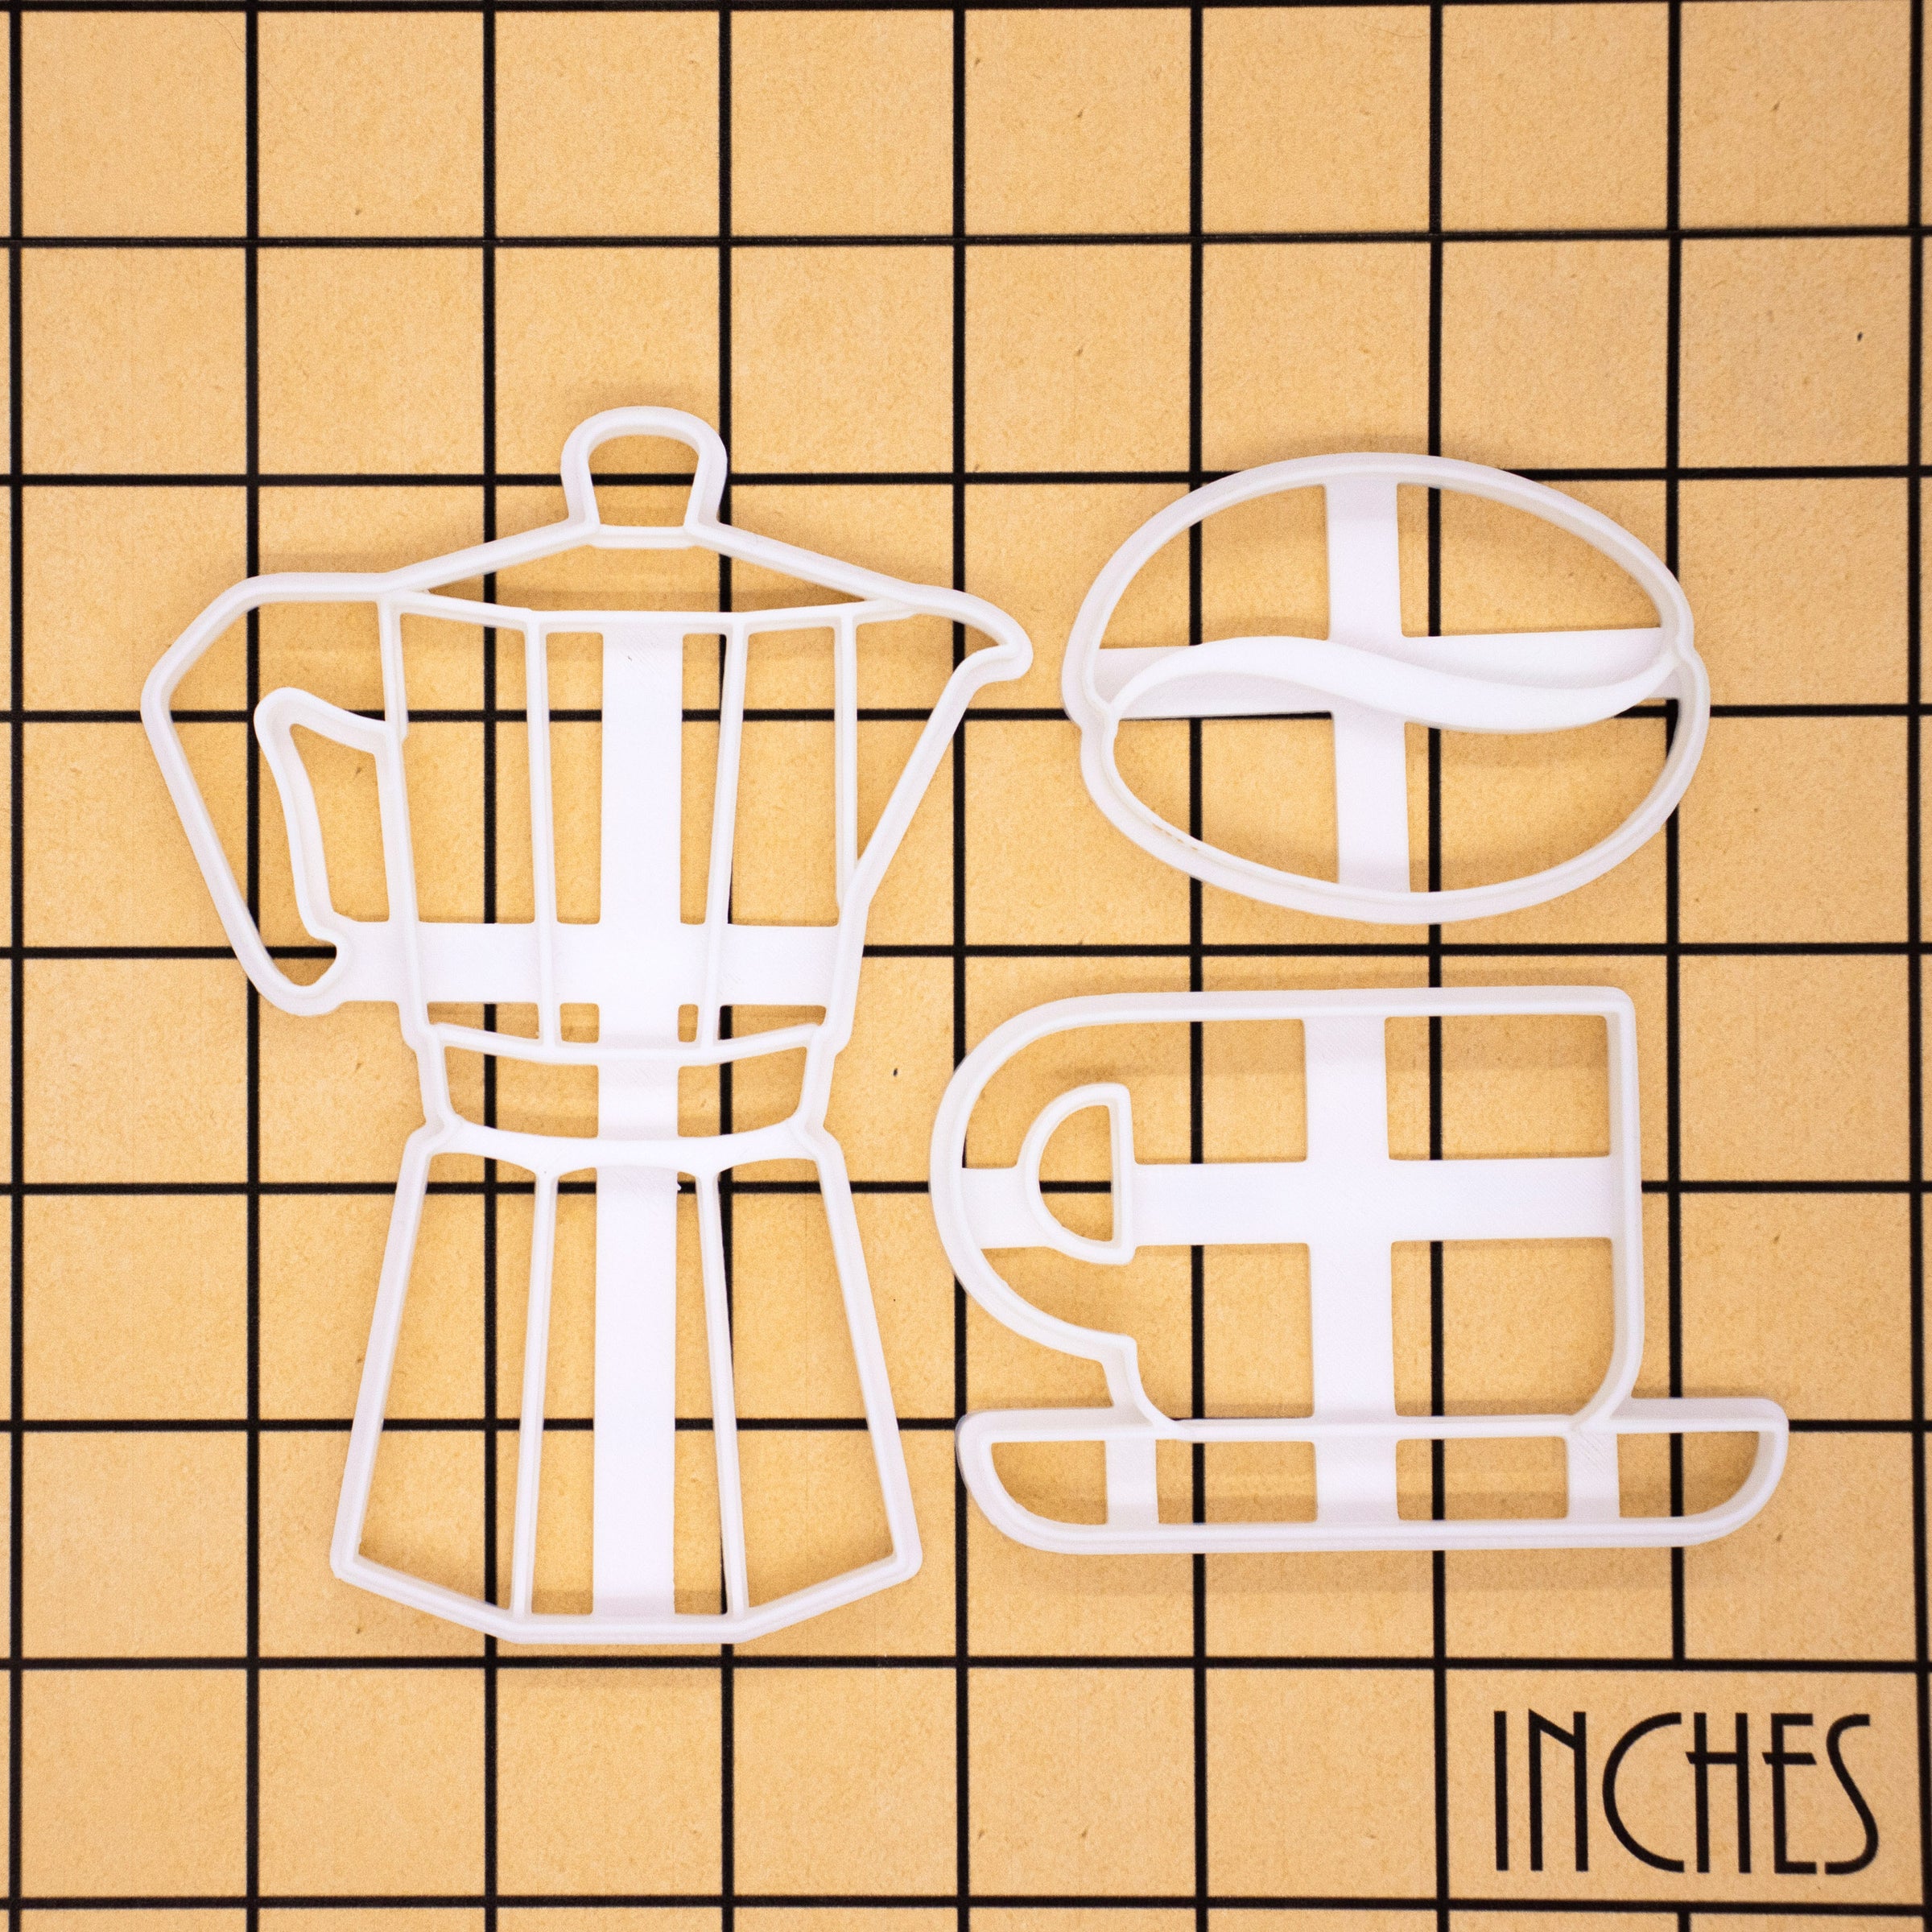 set of 3 coffee themed cookie cutters, featuring a moka pot, coffee bean and coffee cup cookie cutters